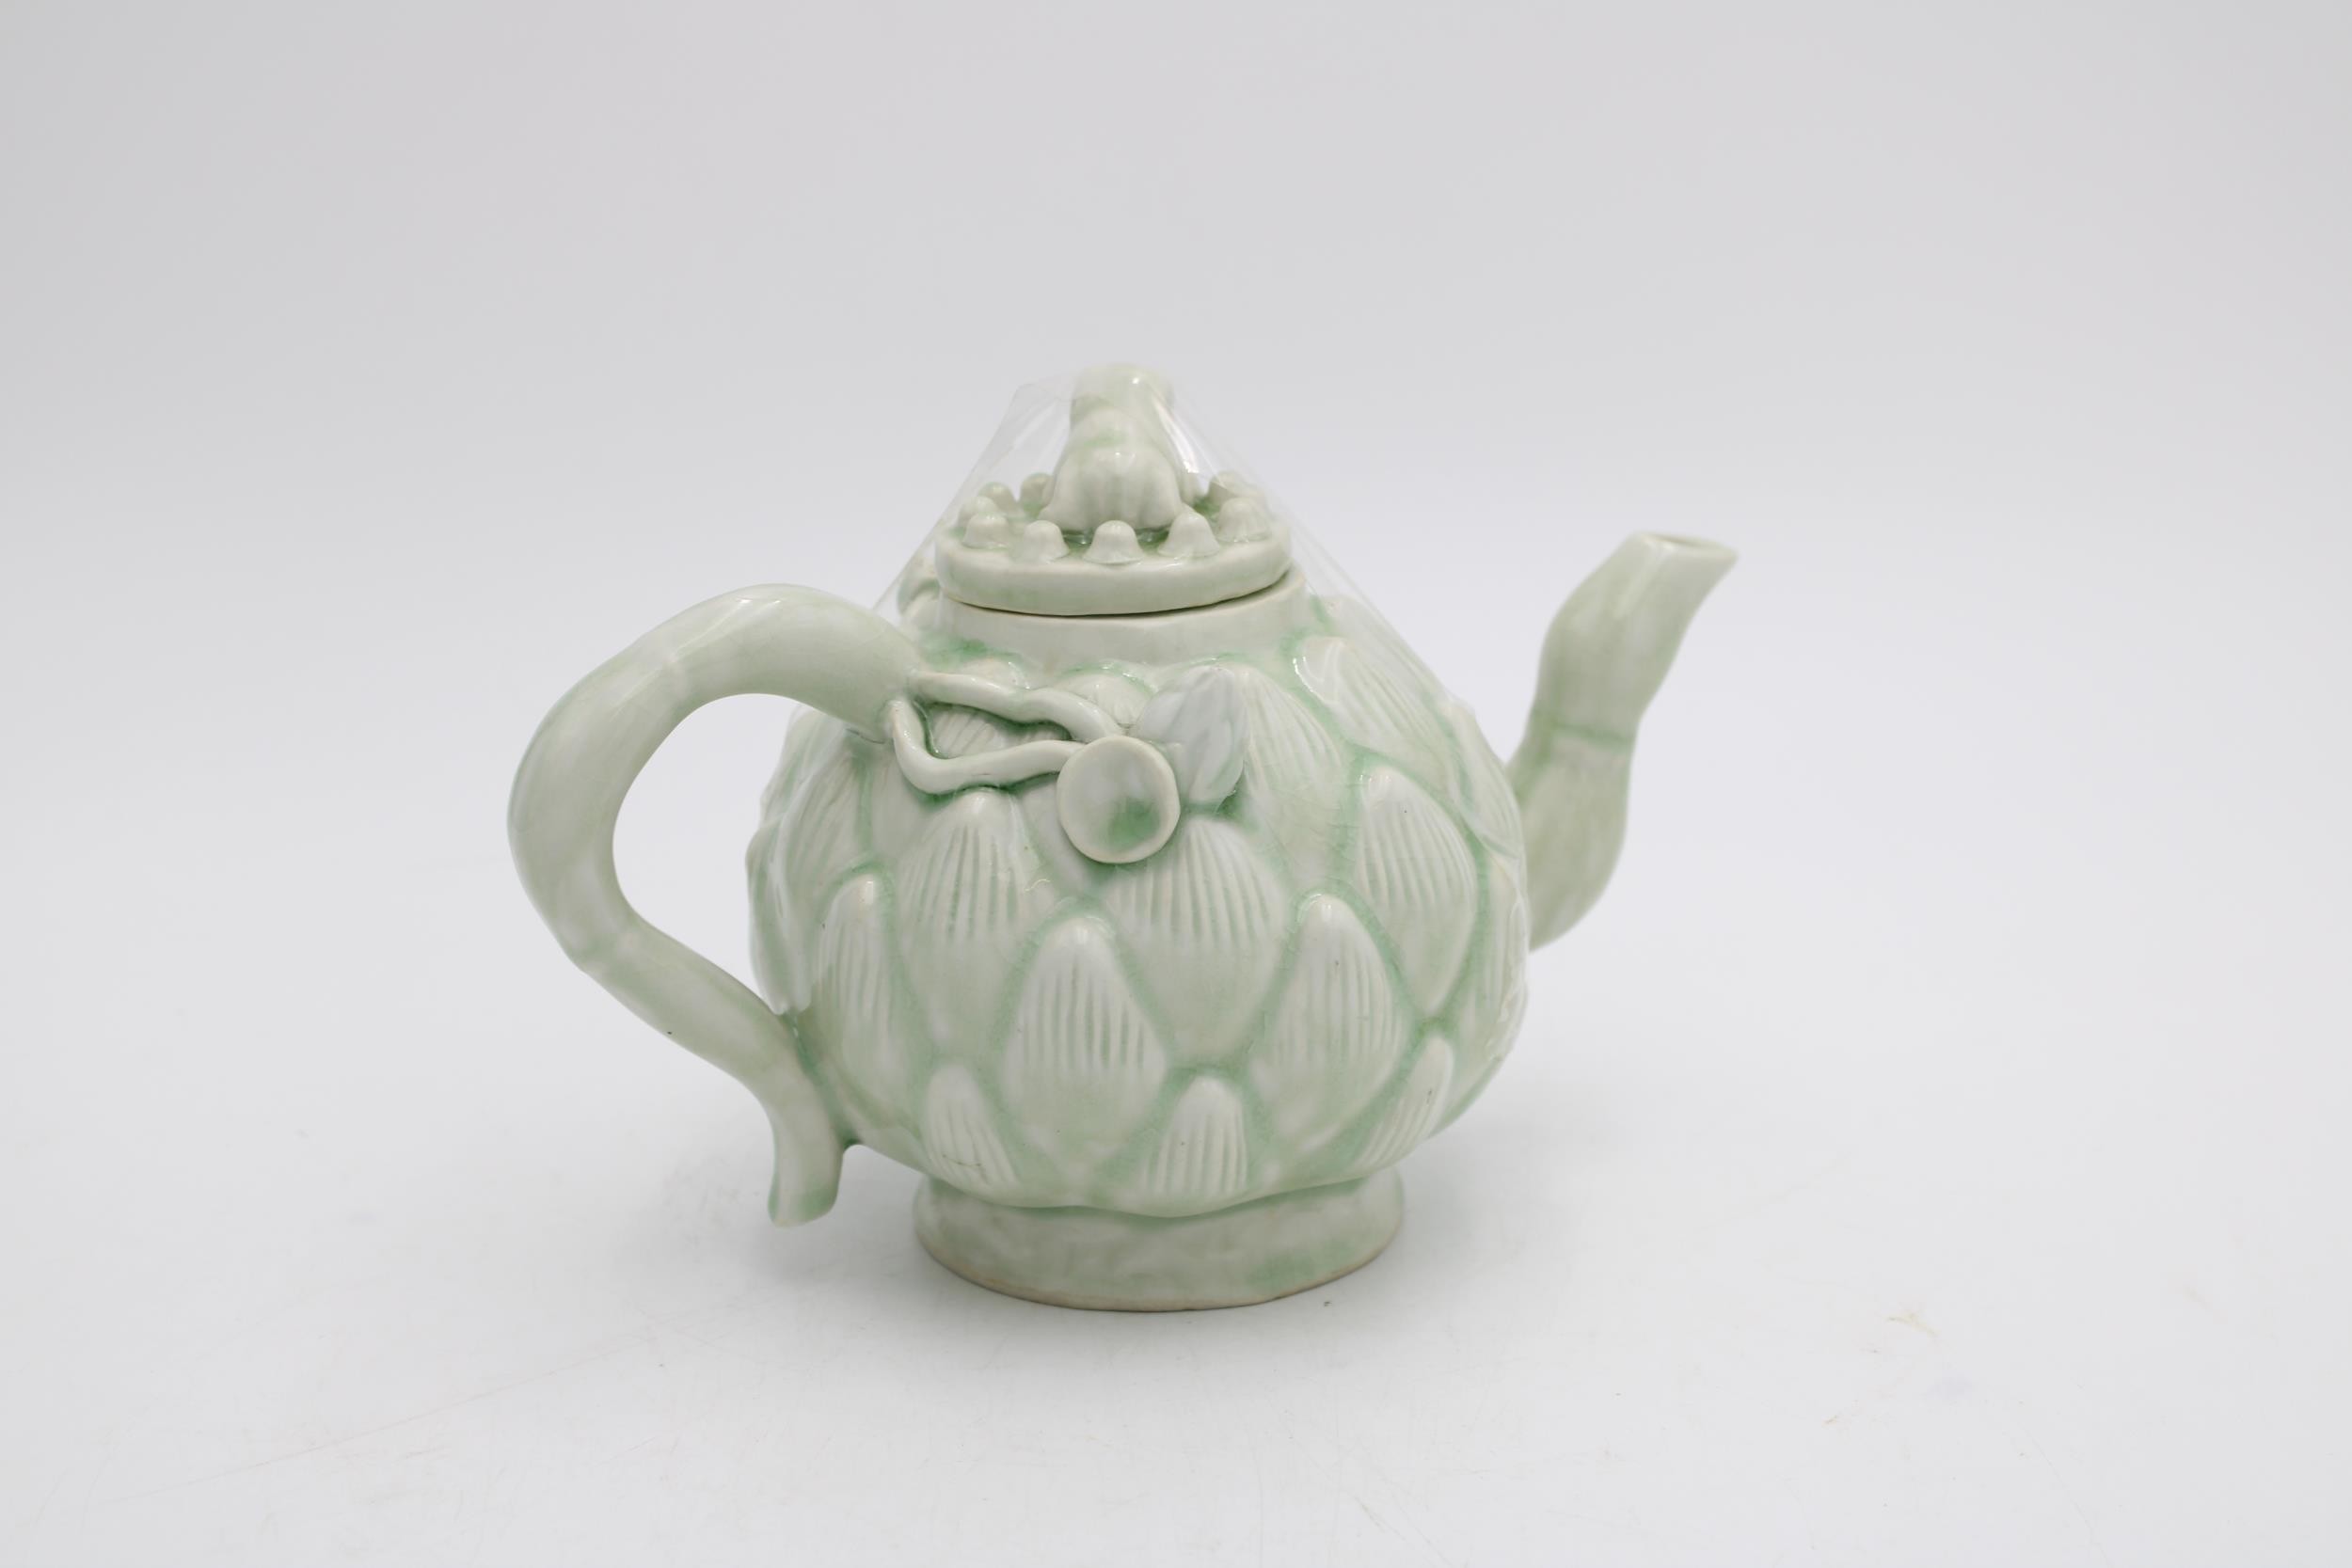 A CELADON GLAZE LOTUS TEAPOT WITH FROG AND NEWT DECORATION, 14cm high - Image 2 of 2